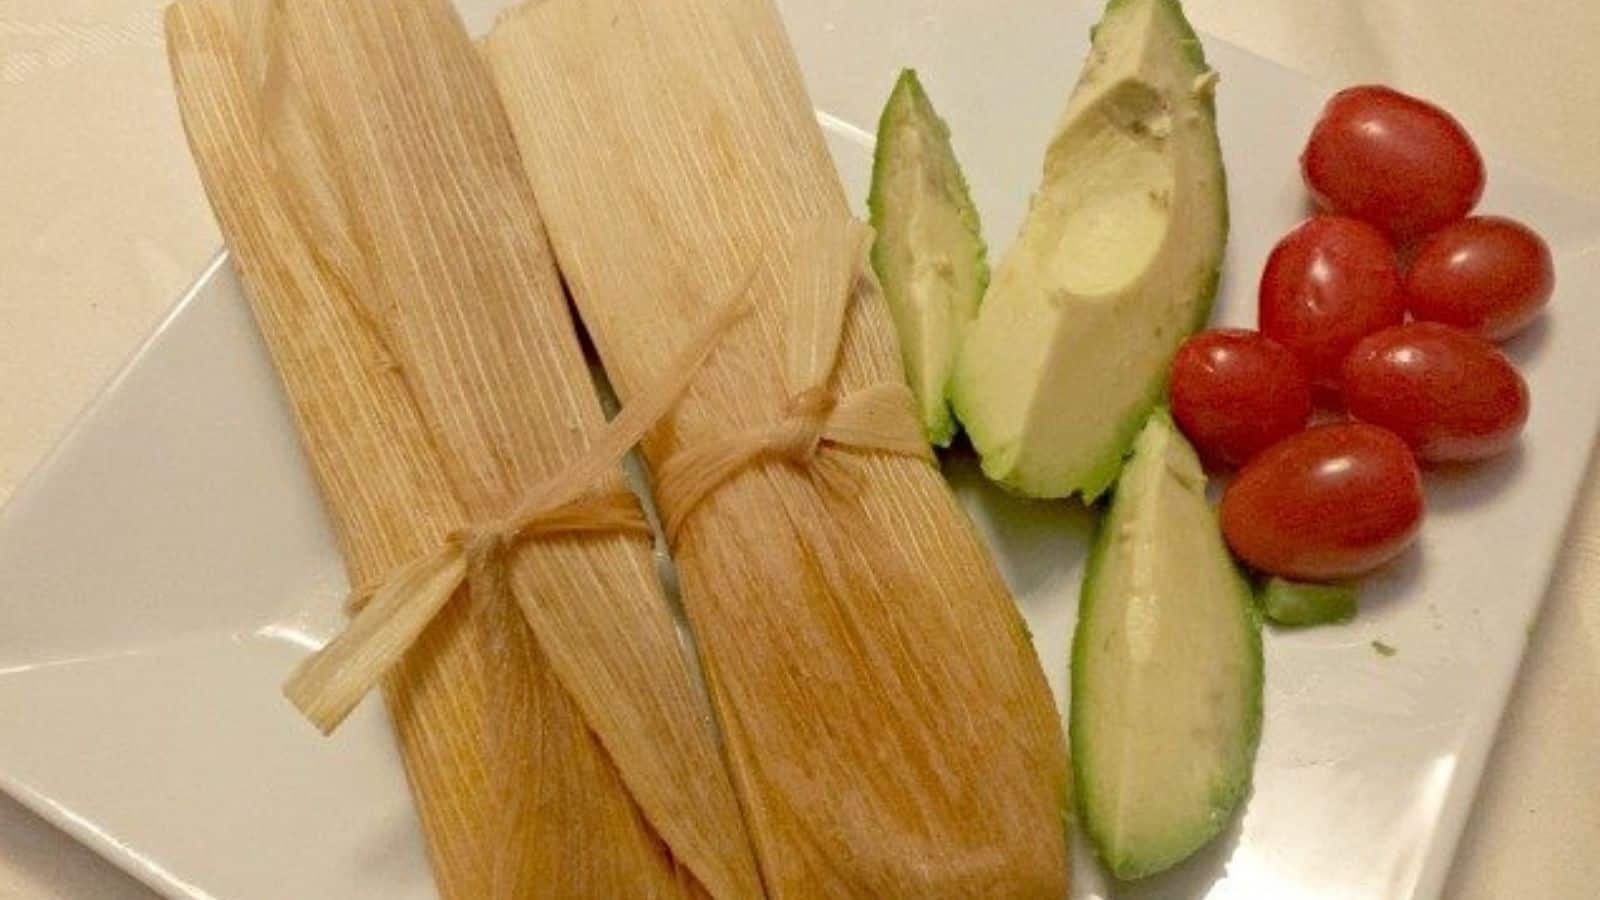 Image shows two Tamales sitting on a white plate with slices of avocado and tomatoes next to it.